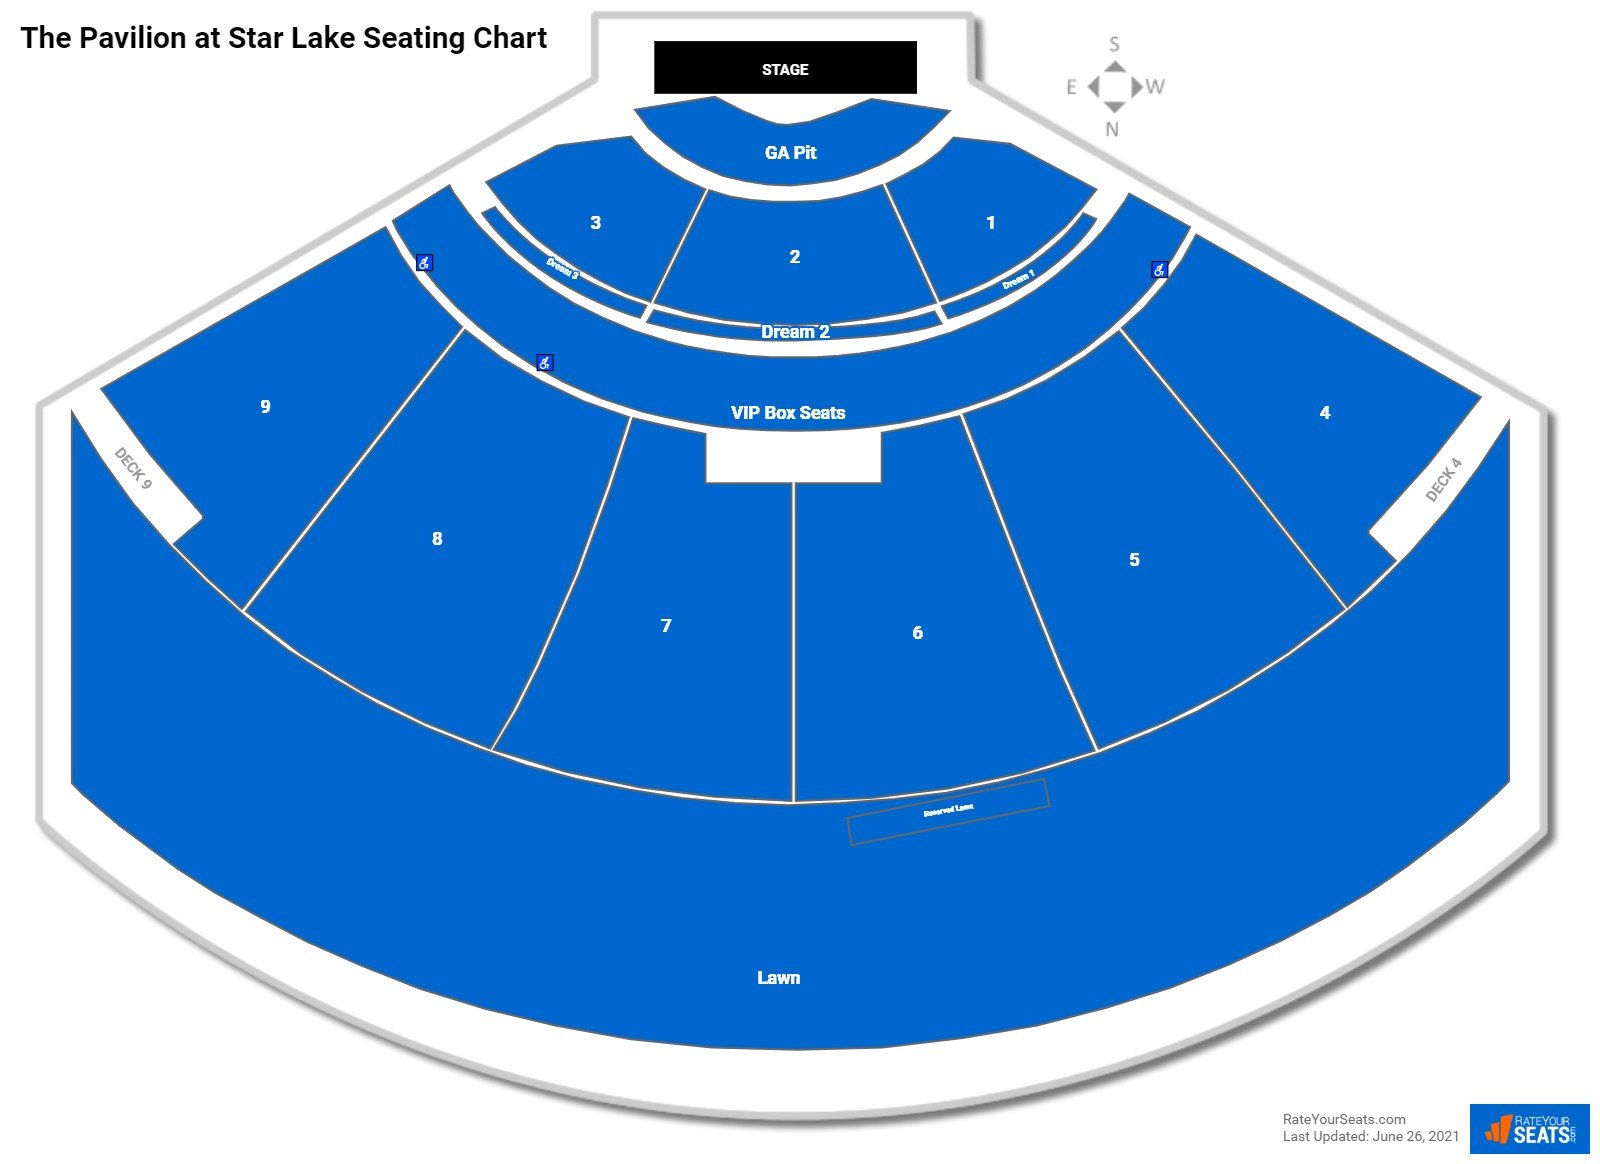 The Pavilion at Star Lake Concert Seating Chart